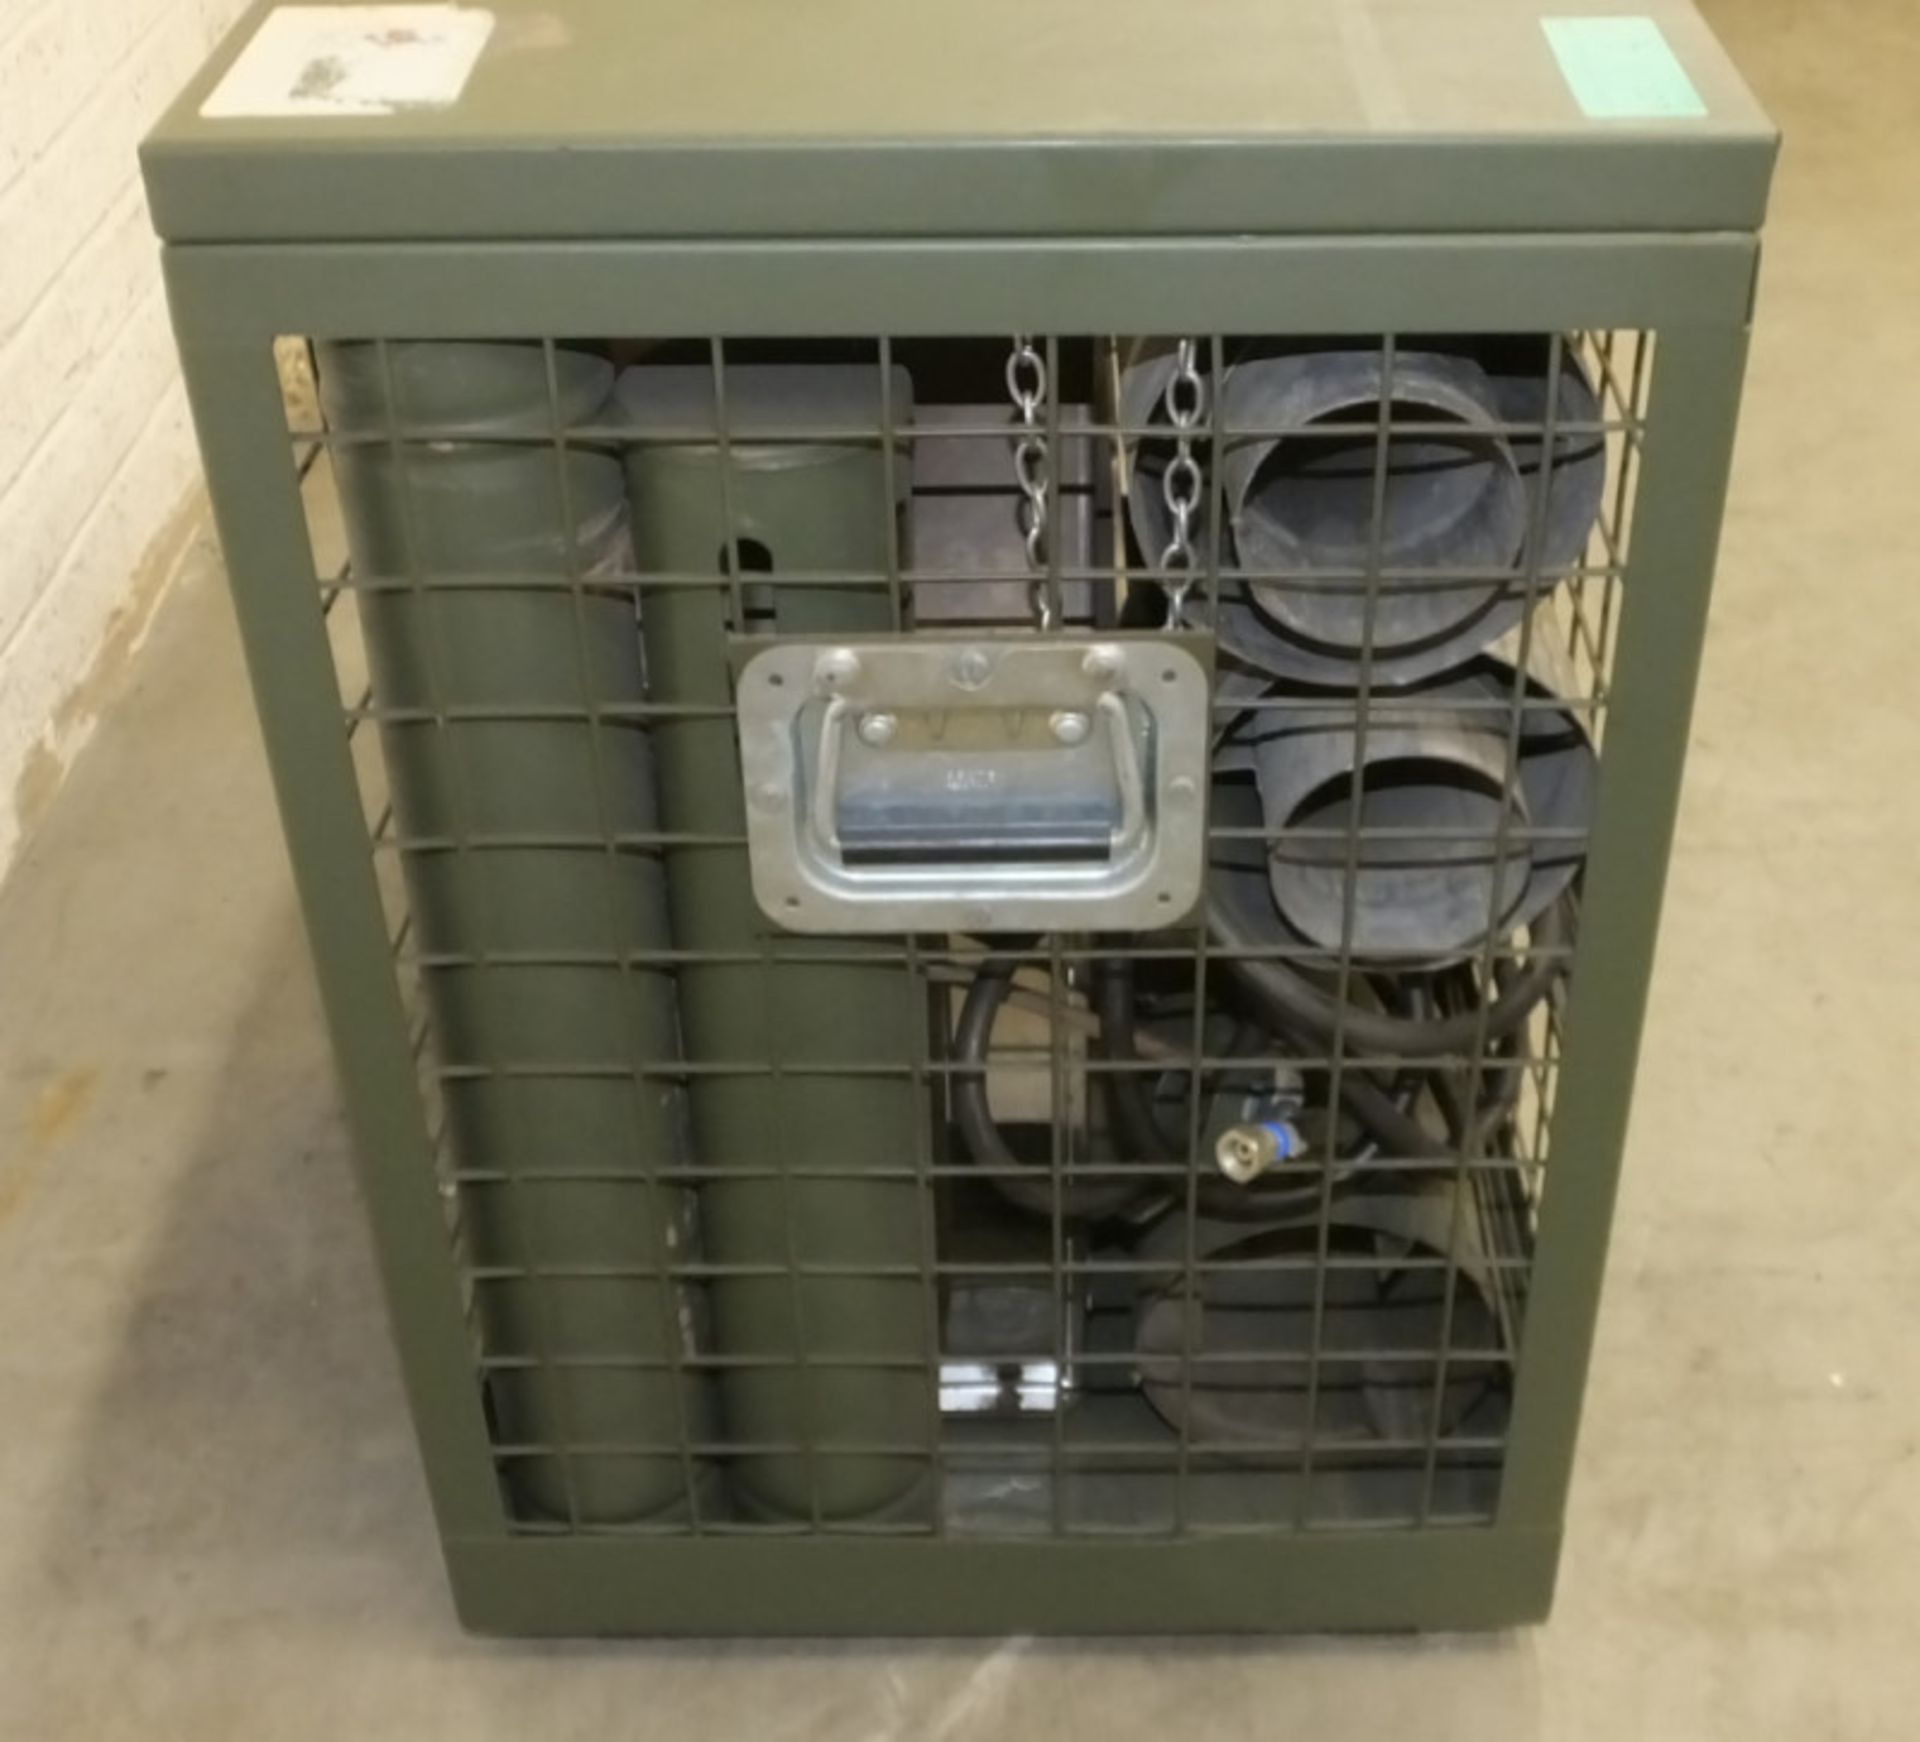 HotBox Heaters Tent Heater GHS III - NSN 4520-99-130-6045 Output - 5-15kW, Ex-MOD specific - Image 11 of 12